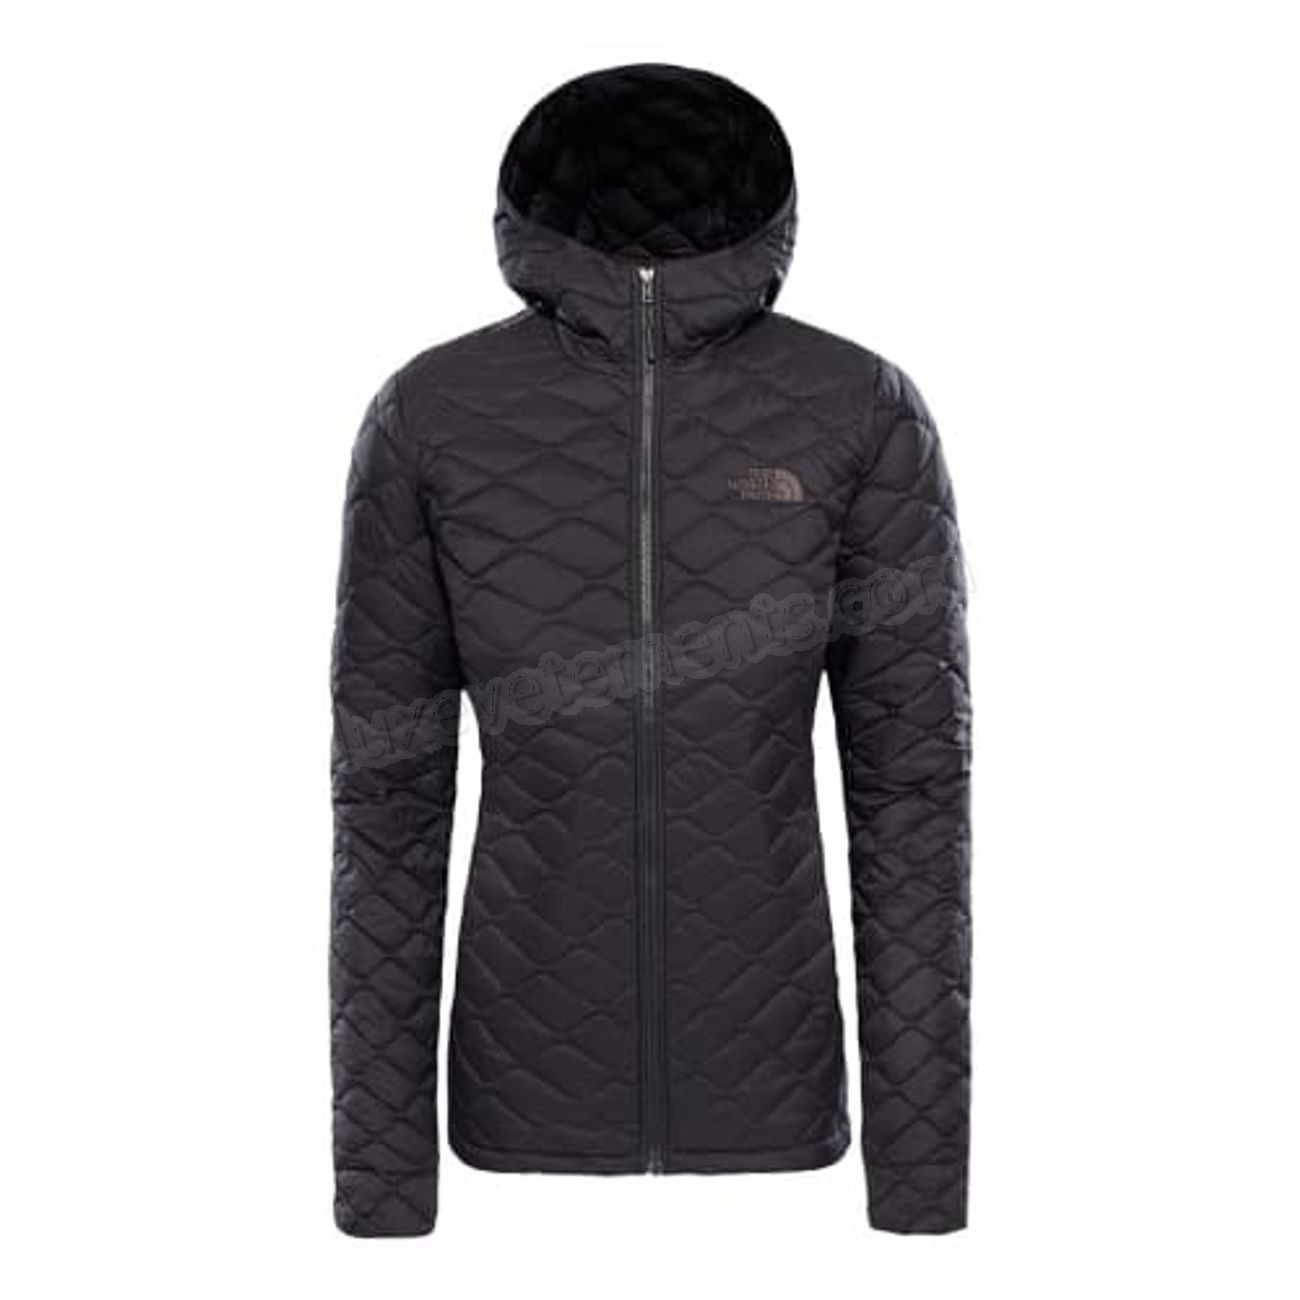 The North Face-montagne femme THE NORTH FACE The North Face Thermoball Hoodie Vente en ligne - The North Face-montagne femme THE NORTH FACE The North Face Thermoball Hoodie Vente en ligne